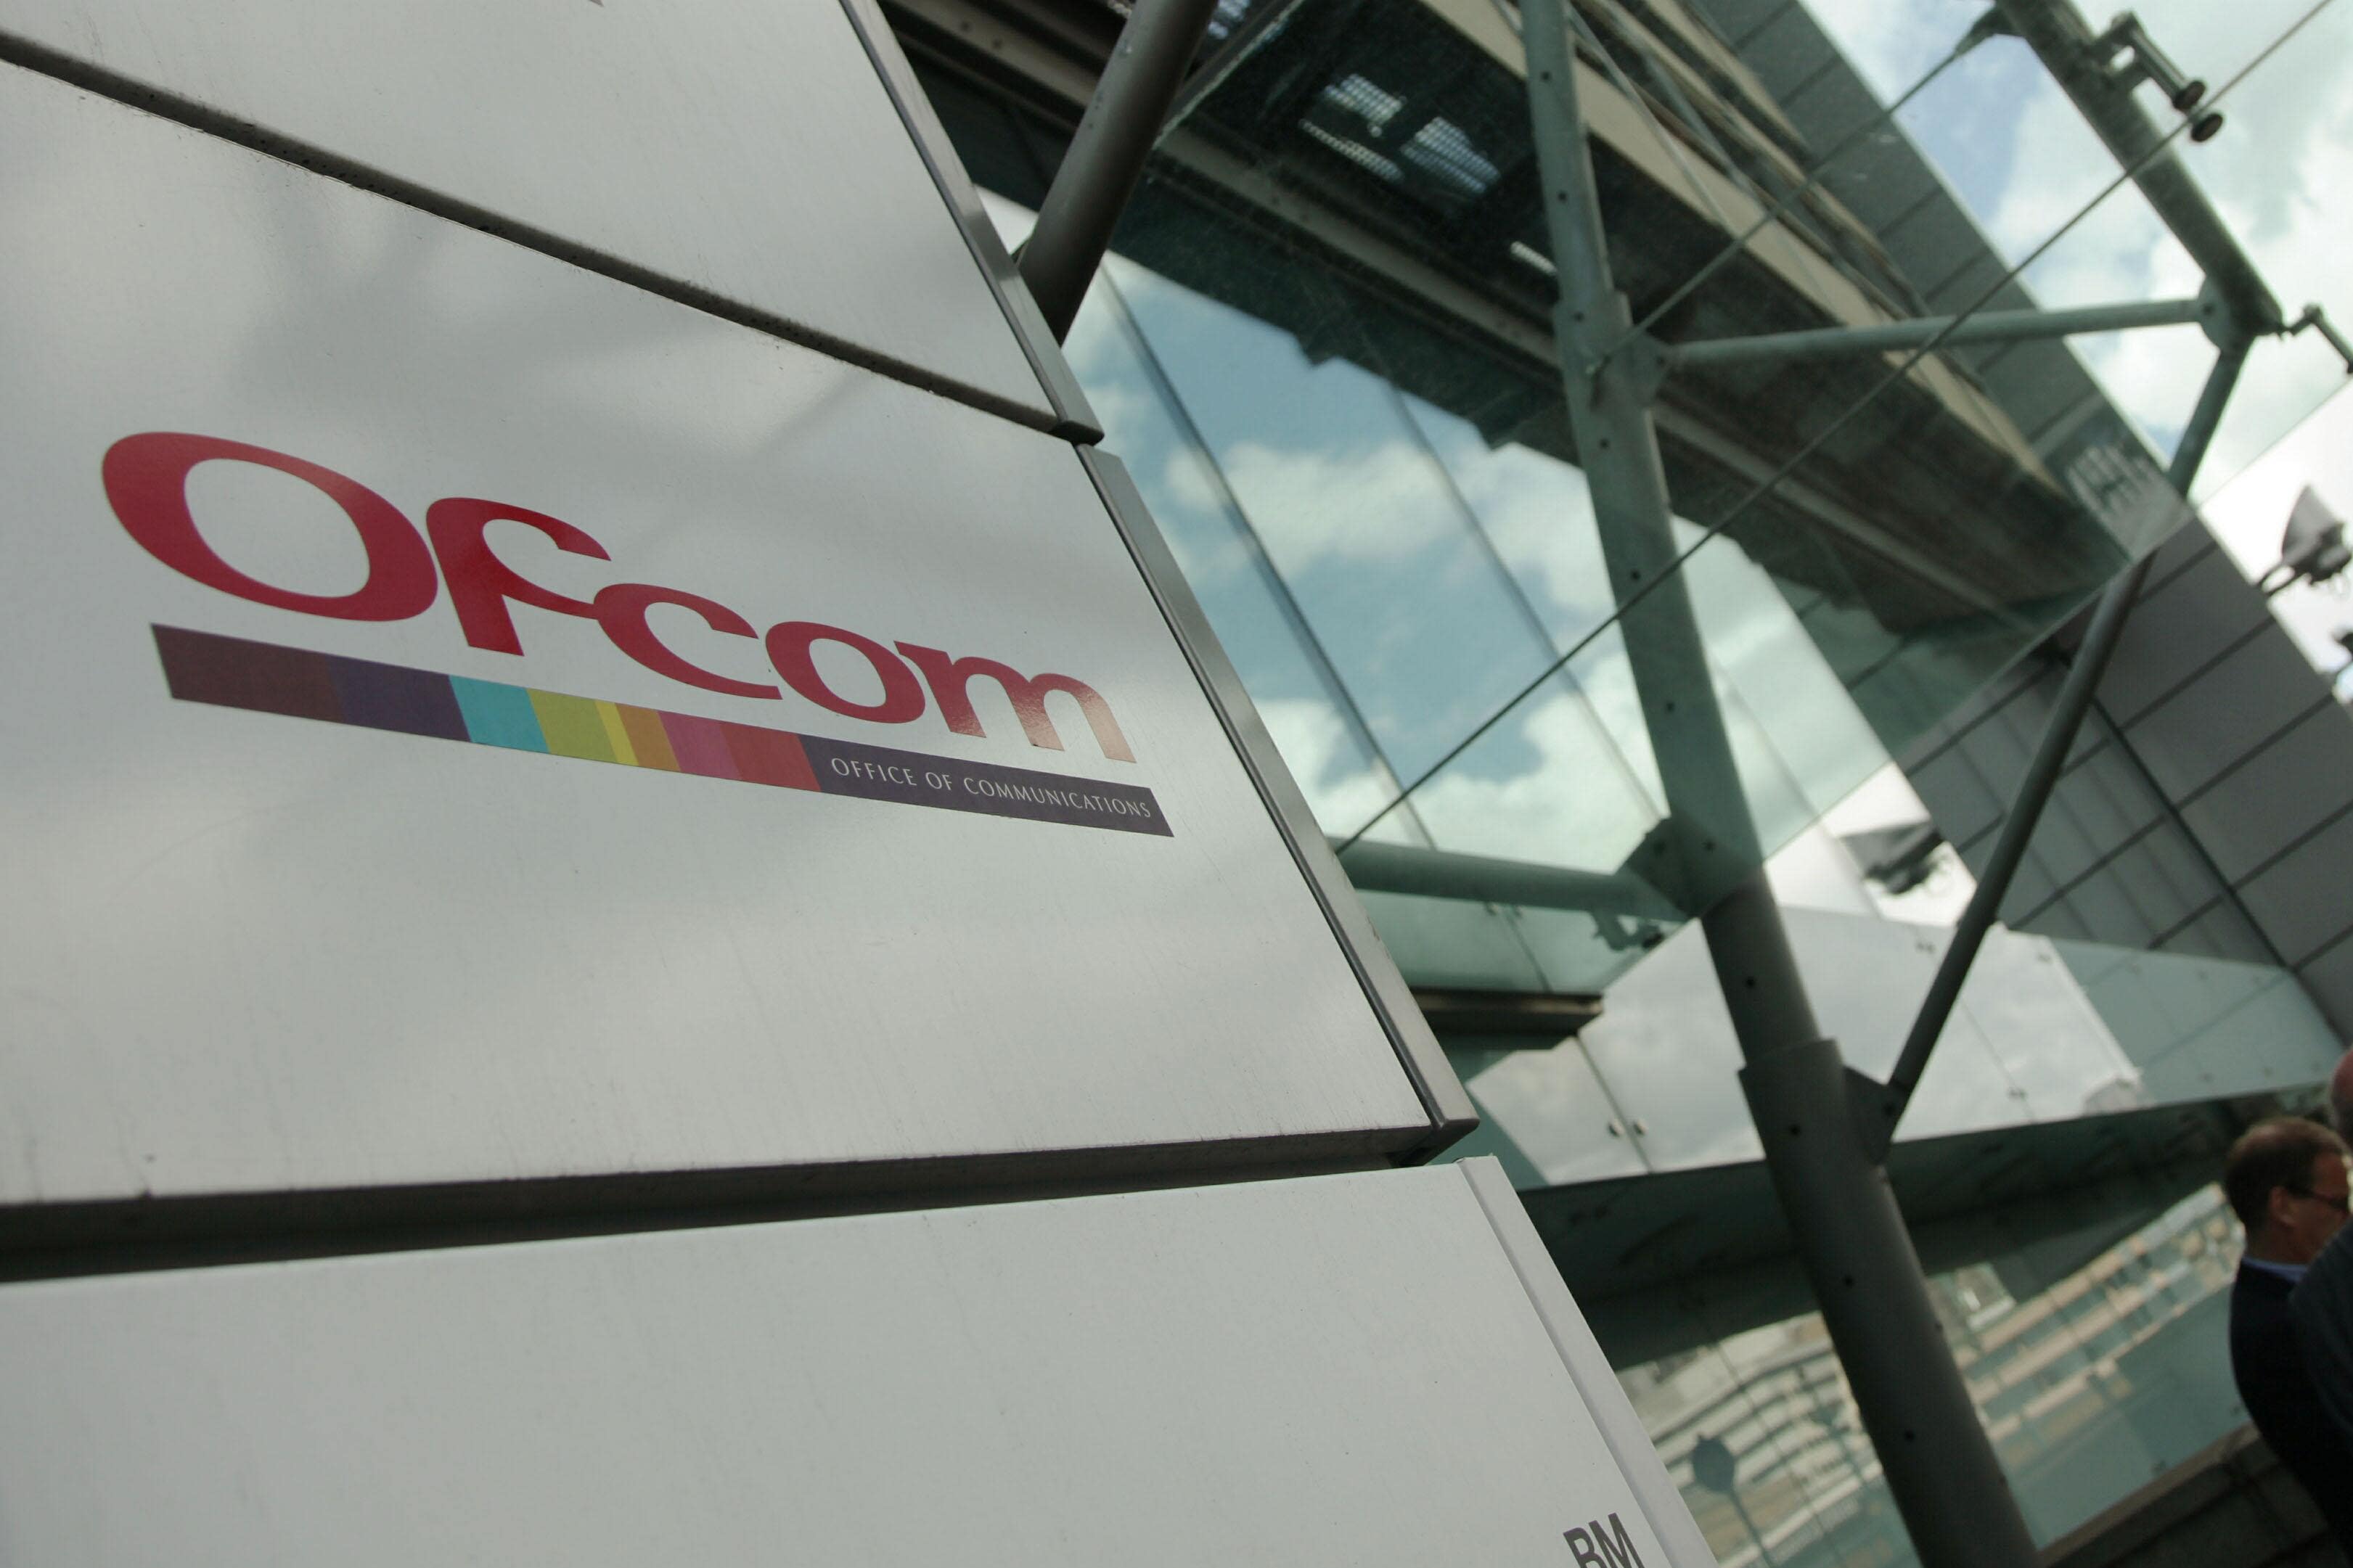 The offices of Ofcom (Office of Communications) in Southwark, London (Yui Mok/PA)